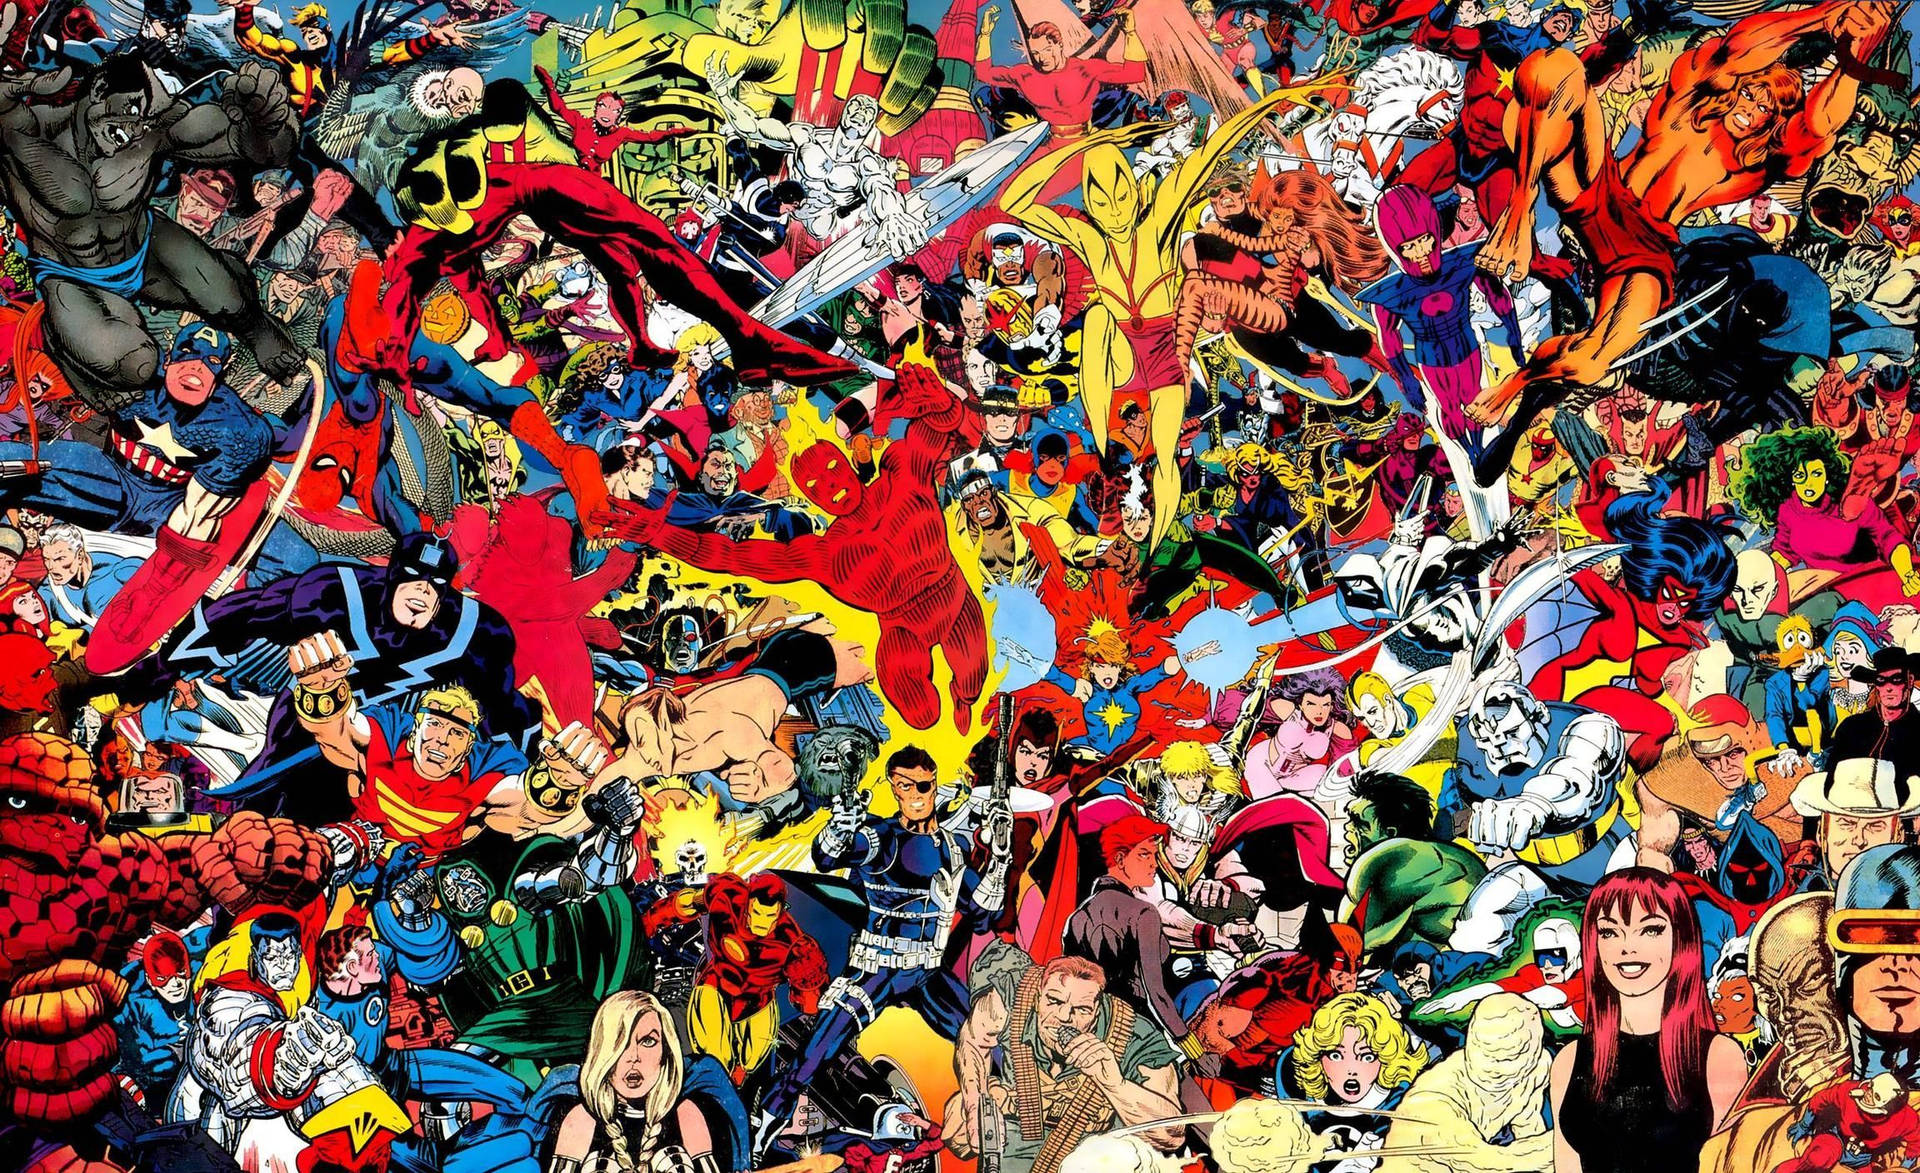 “Marvel Comics: Bringing Superheroes To Life For Over 80 Years” Wallpaper